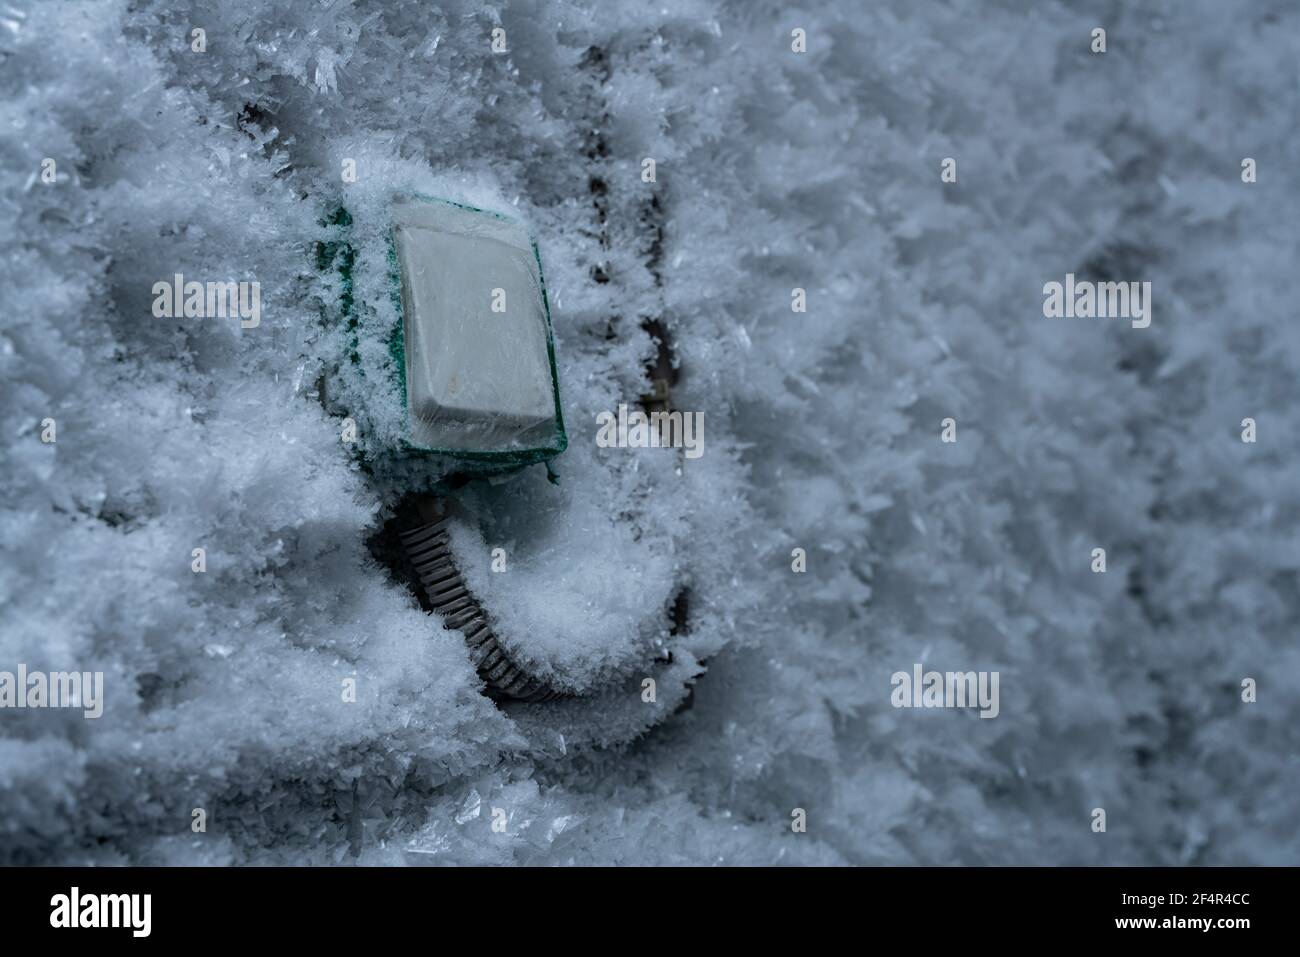 Snow covered device with switch on frozen wall in winter Stock Photo